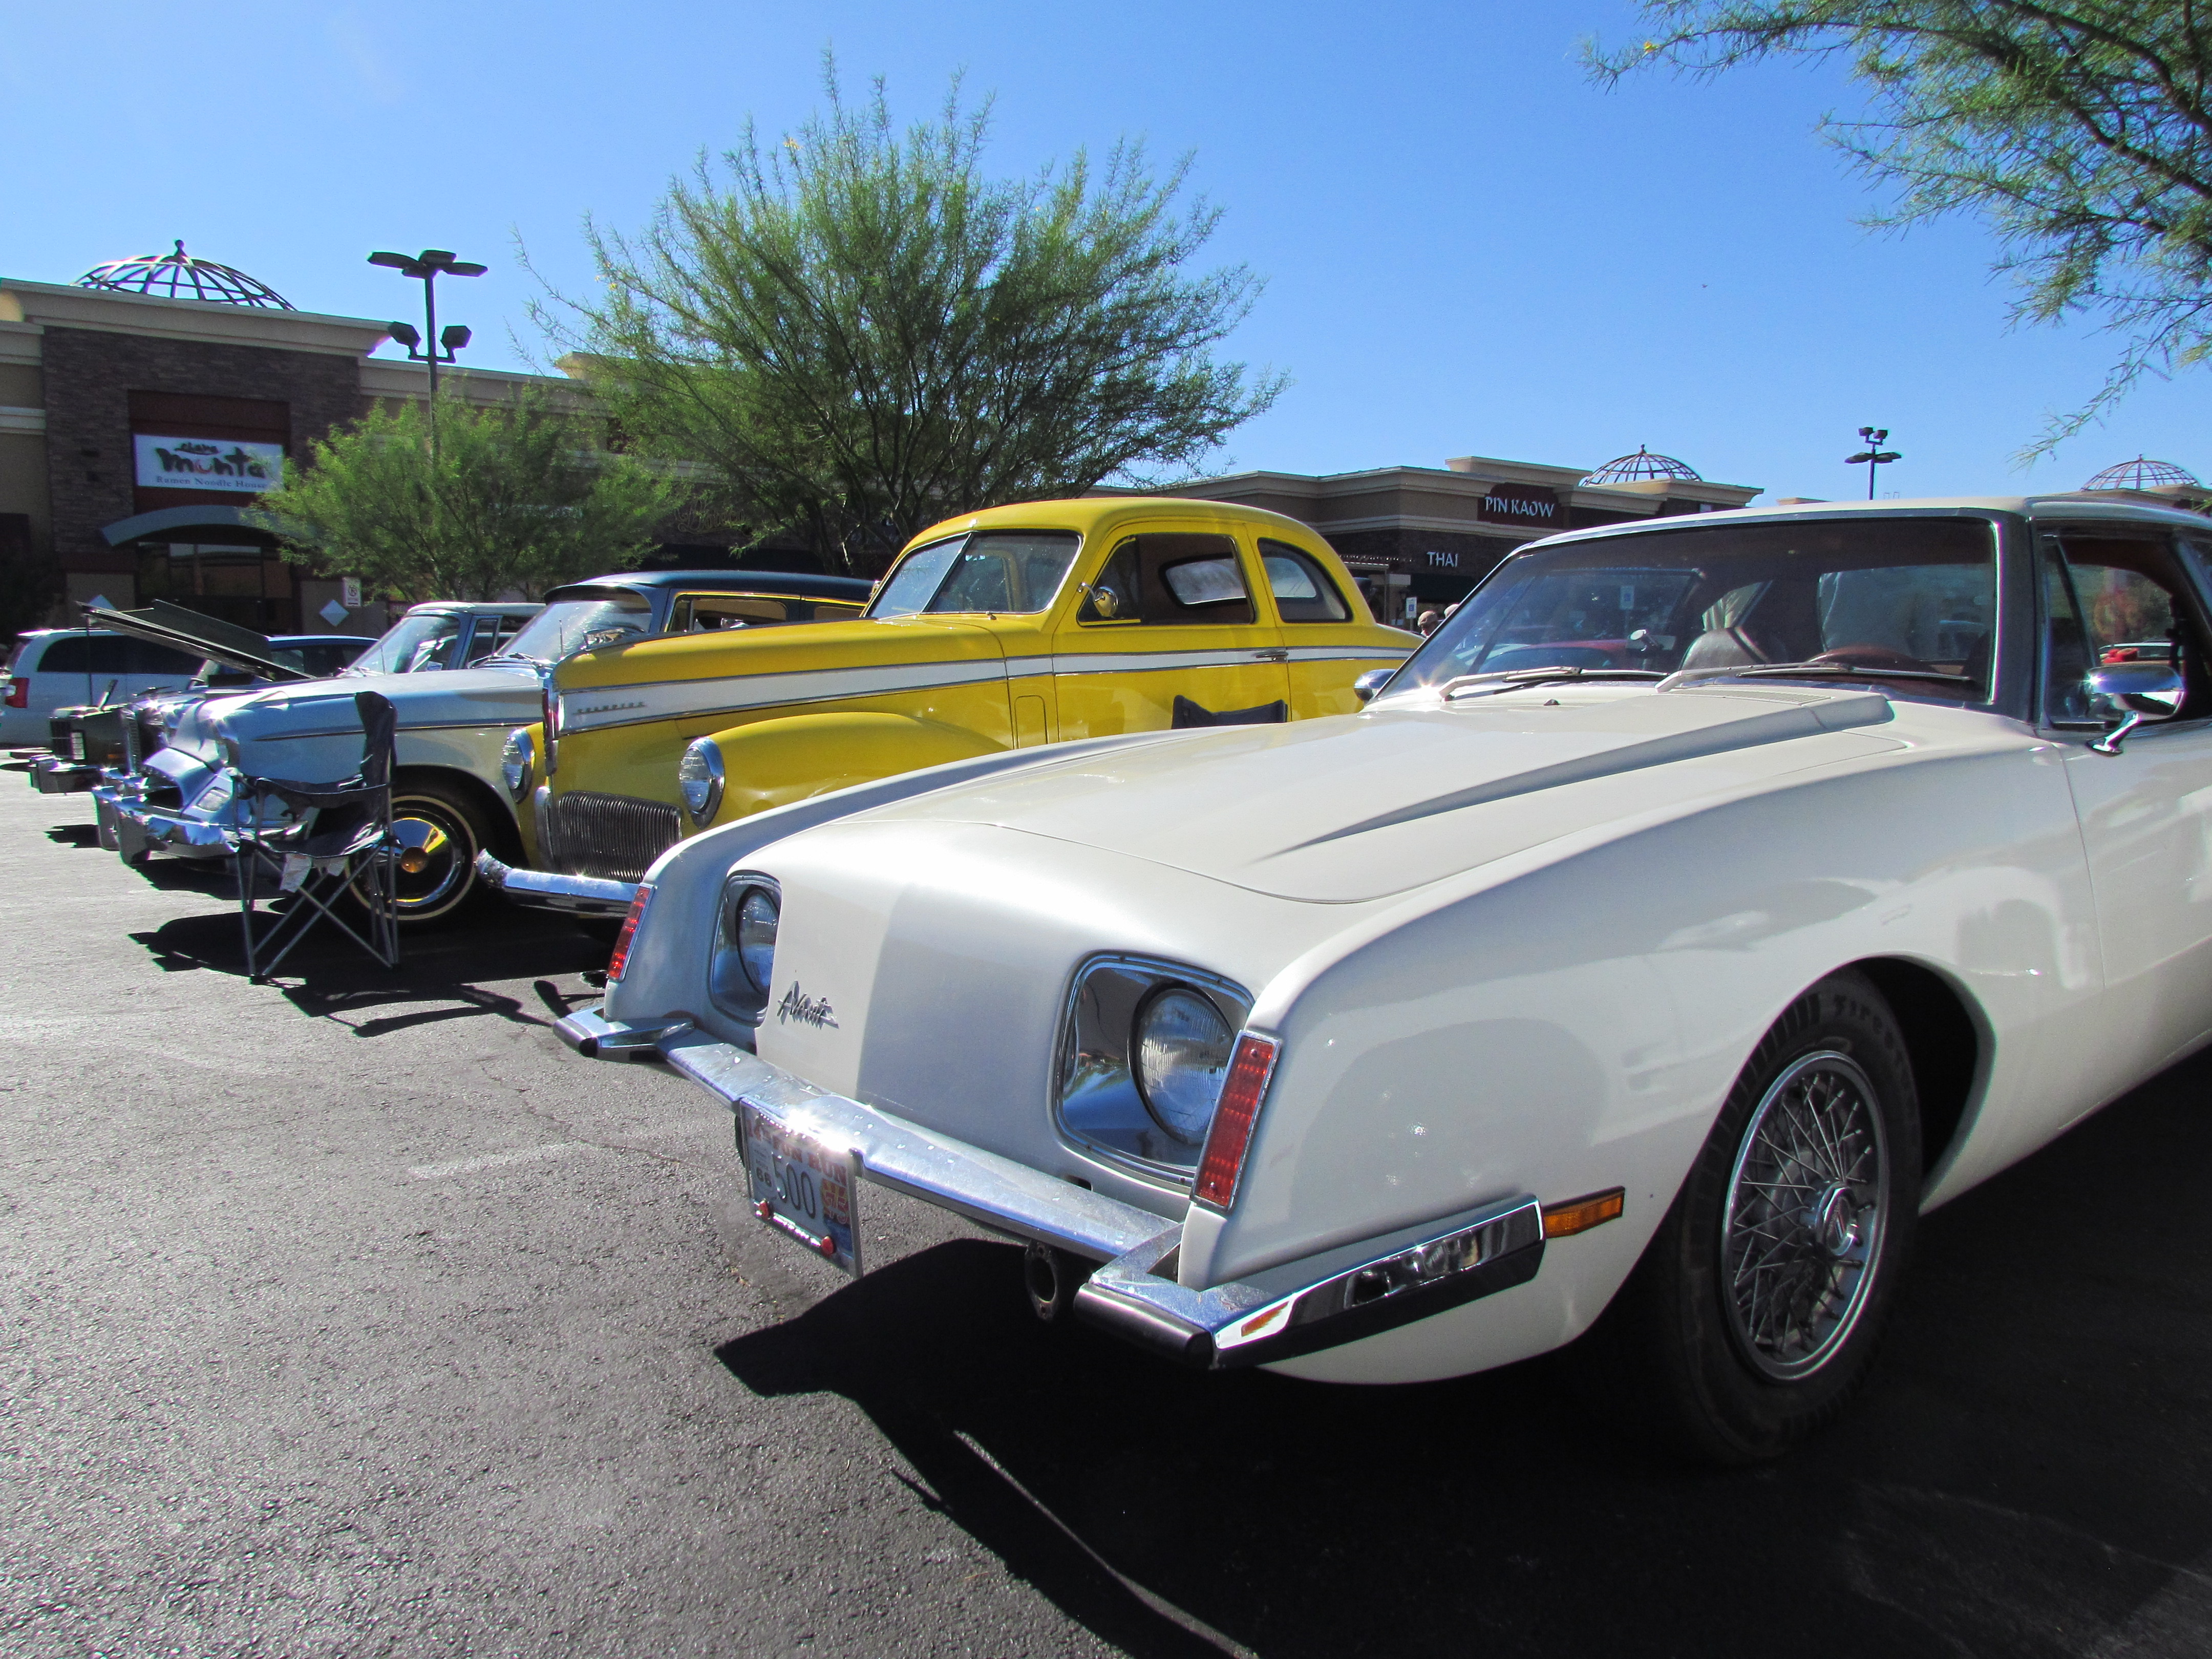 Las Vegas, Off The Strip: The Car Show on Eastern, ClassicCars.com Journal